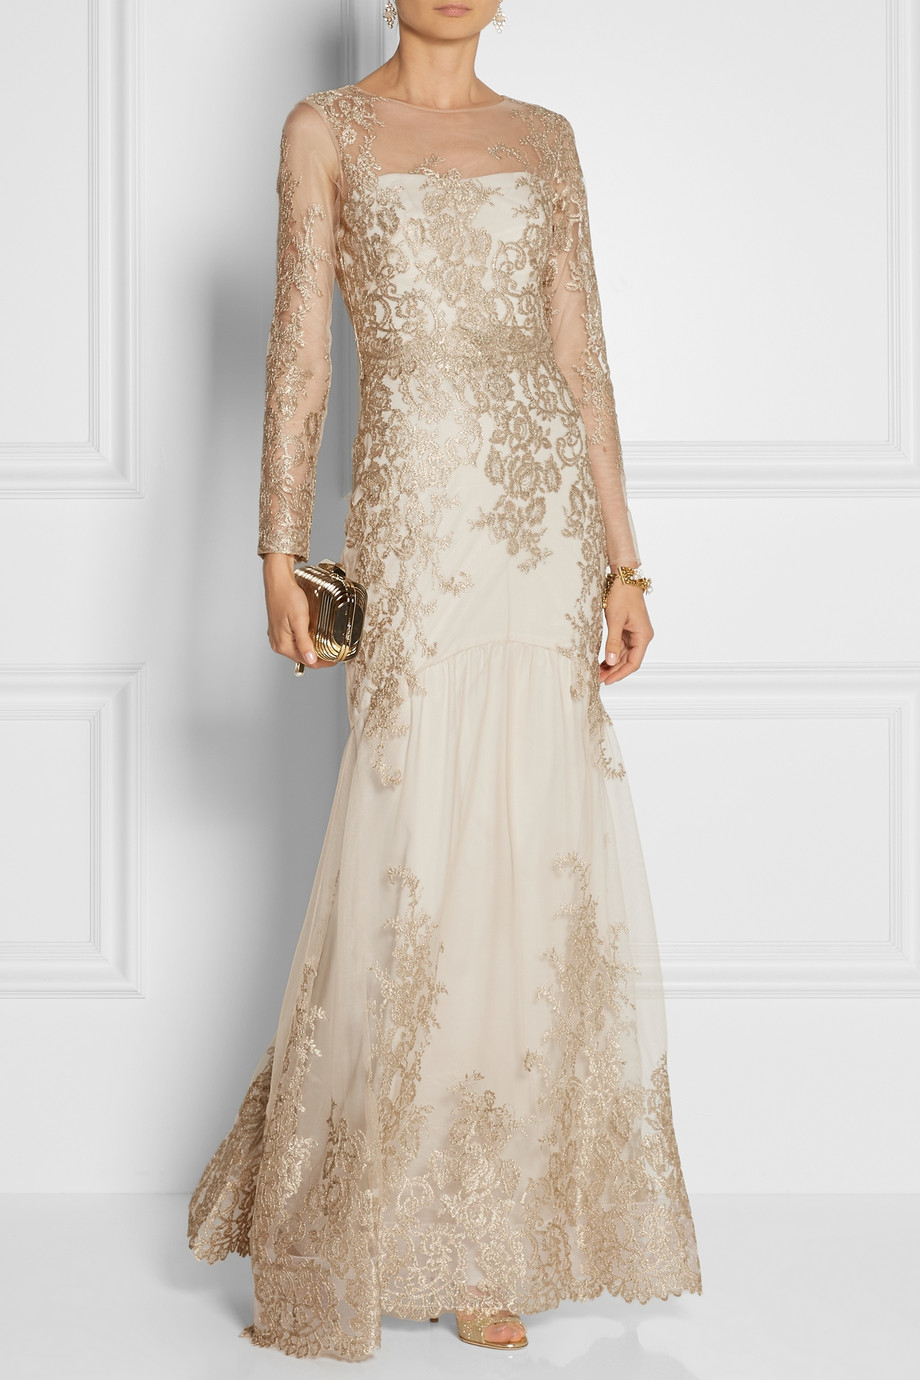 Marchesa notte Embroidered Tulle Gown in Metallic | Lyst